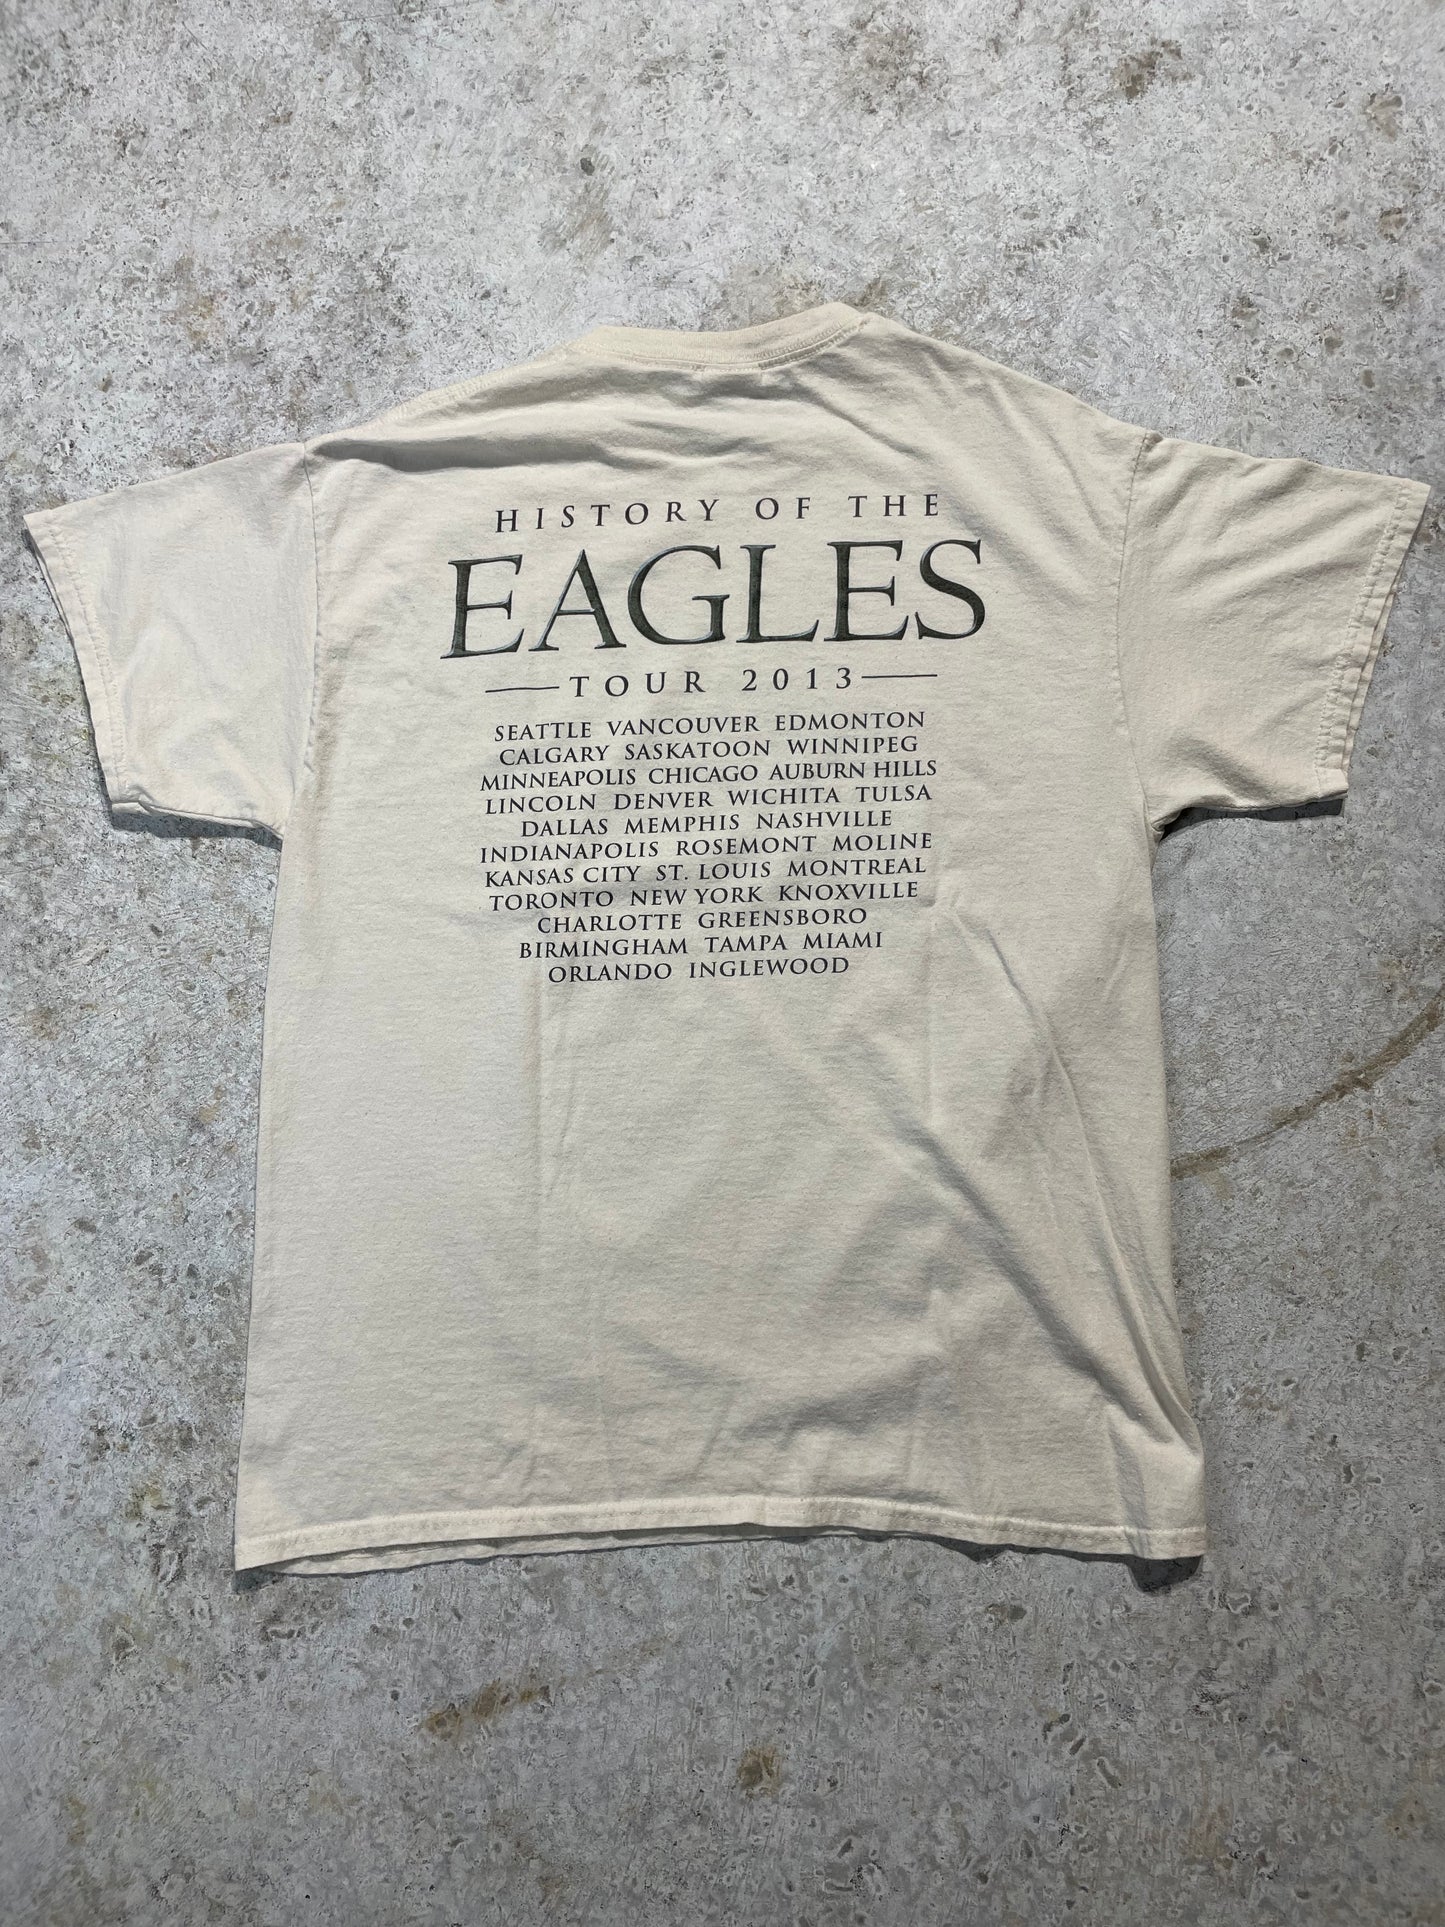 2013 History of the Eagles Tour (Large), Tee - Vintage64.com